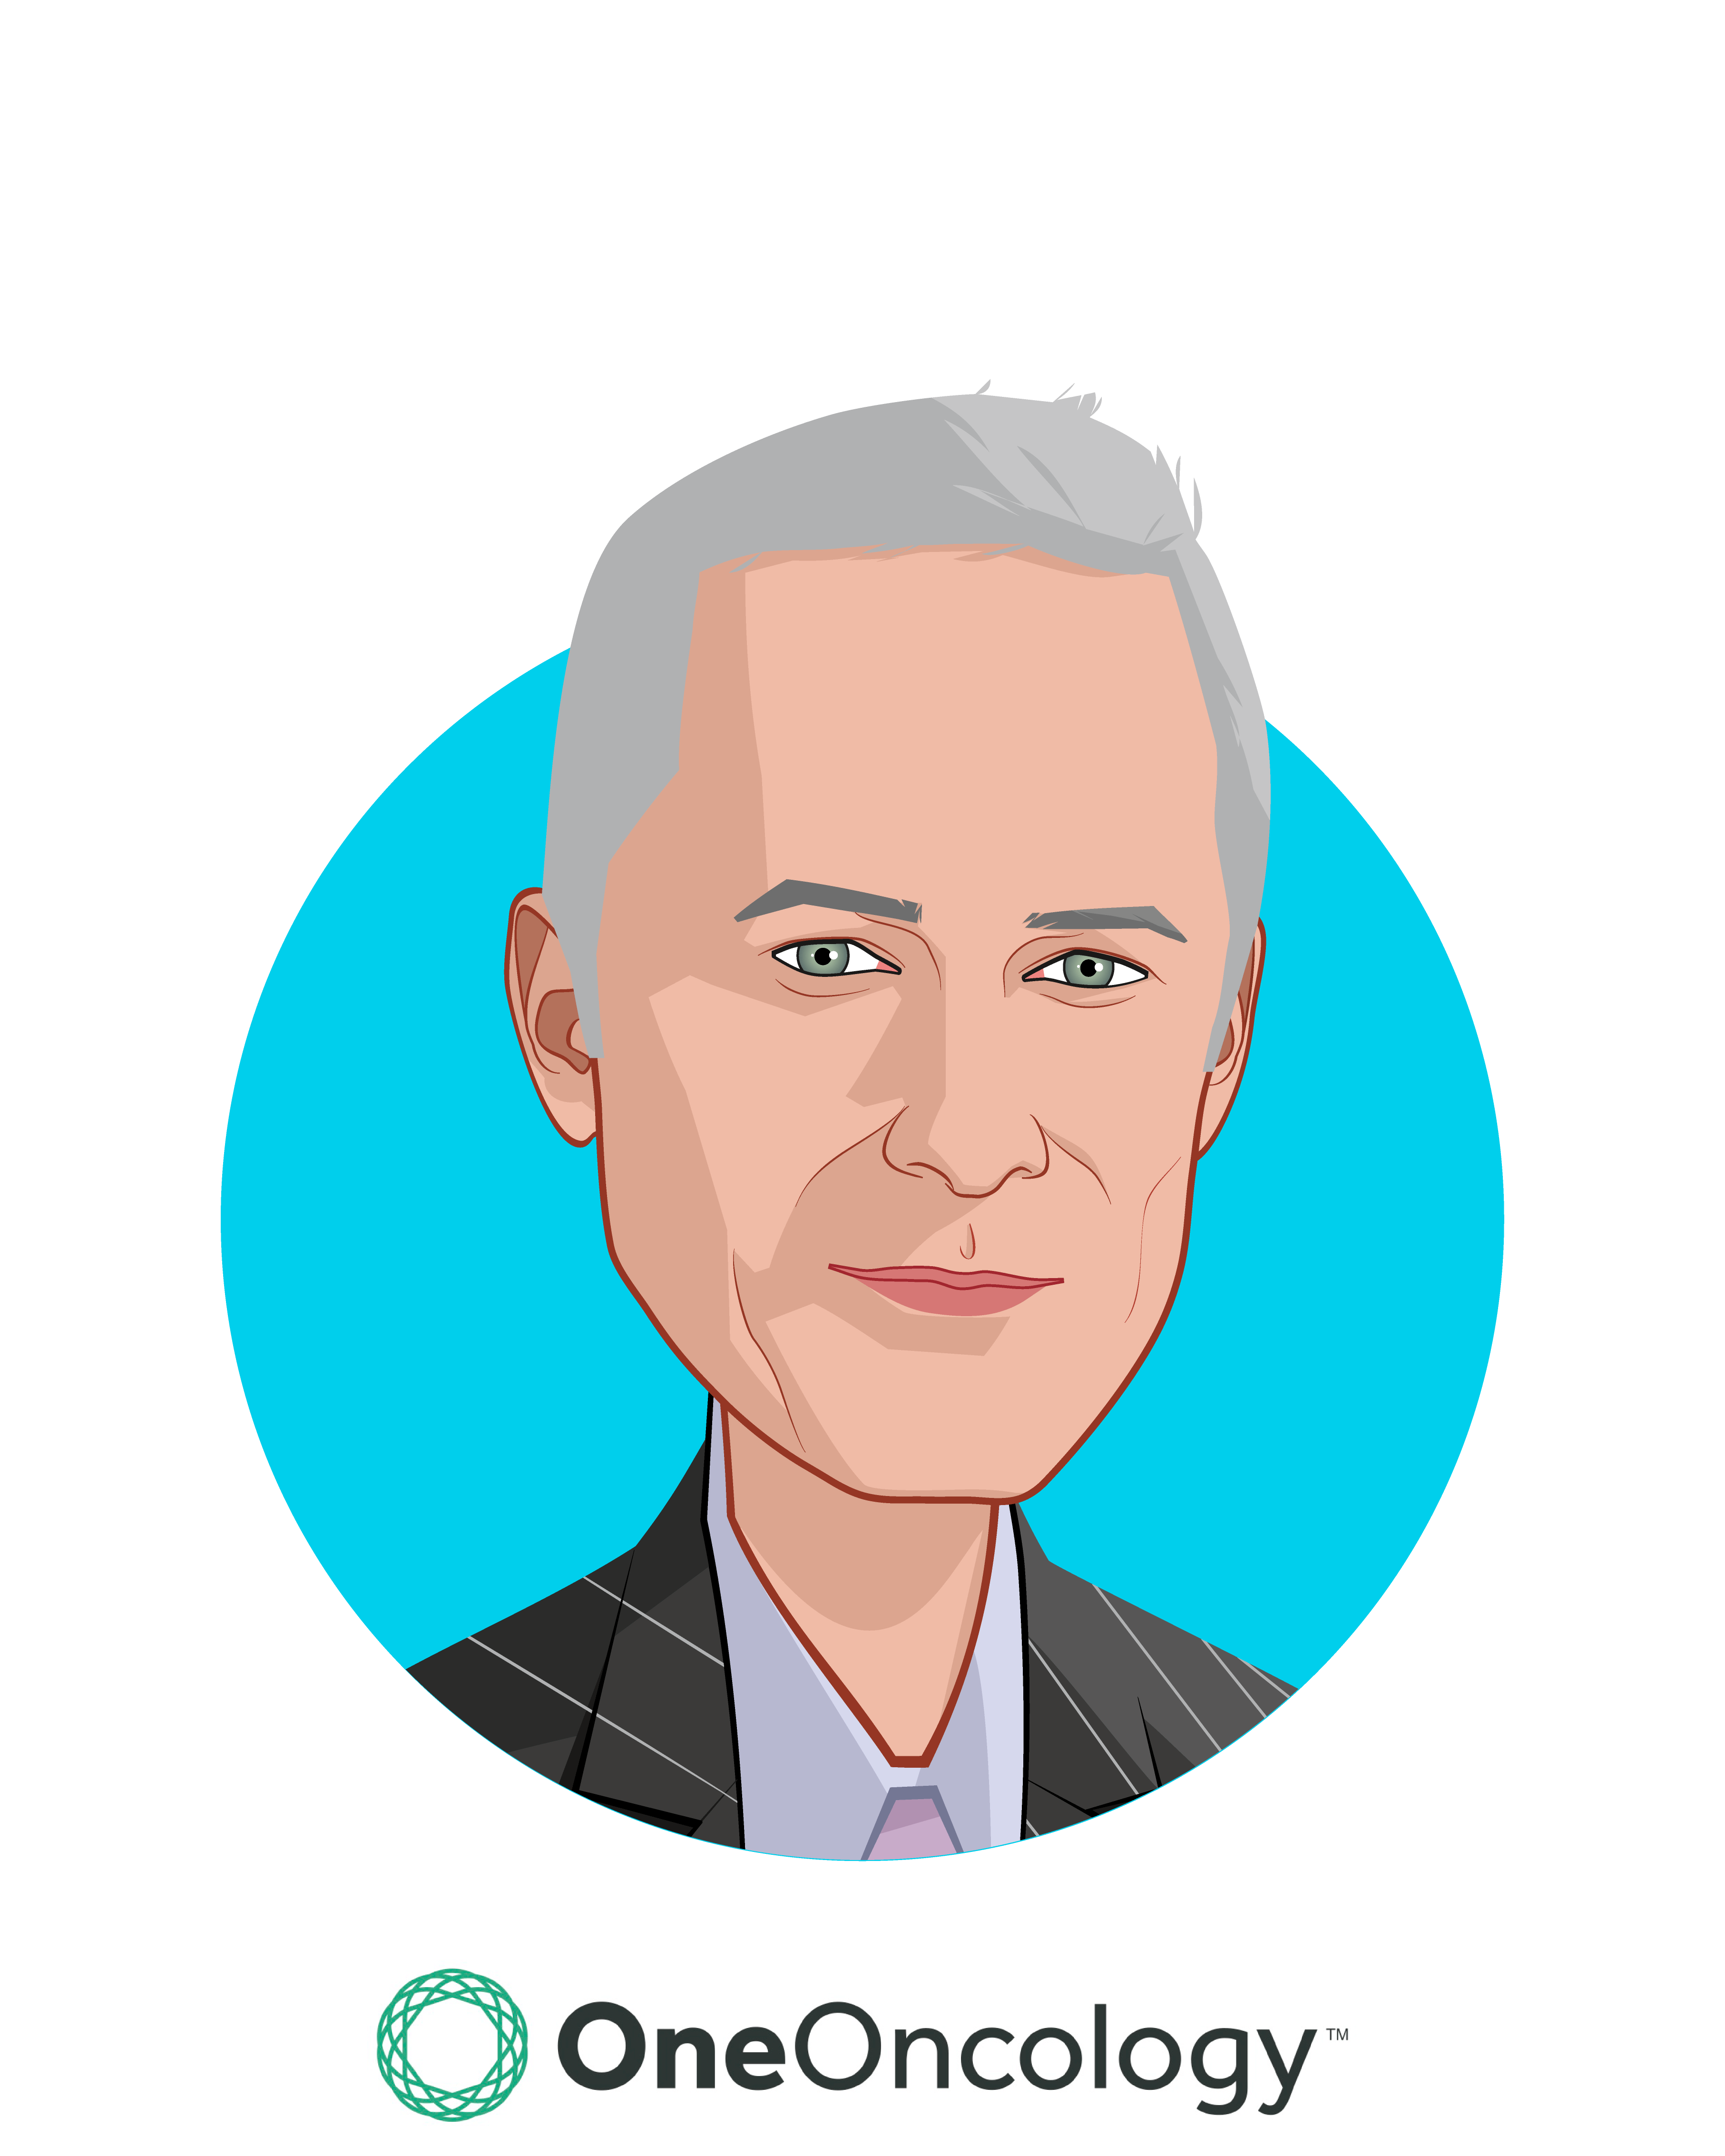 Main caricature of Tracy L. Bahl, who is speaking at HLTH and is President & Chief Executive Officer at OneOncology